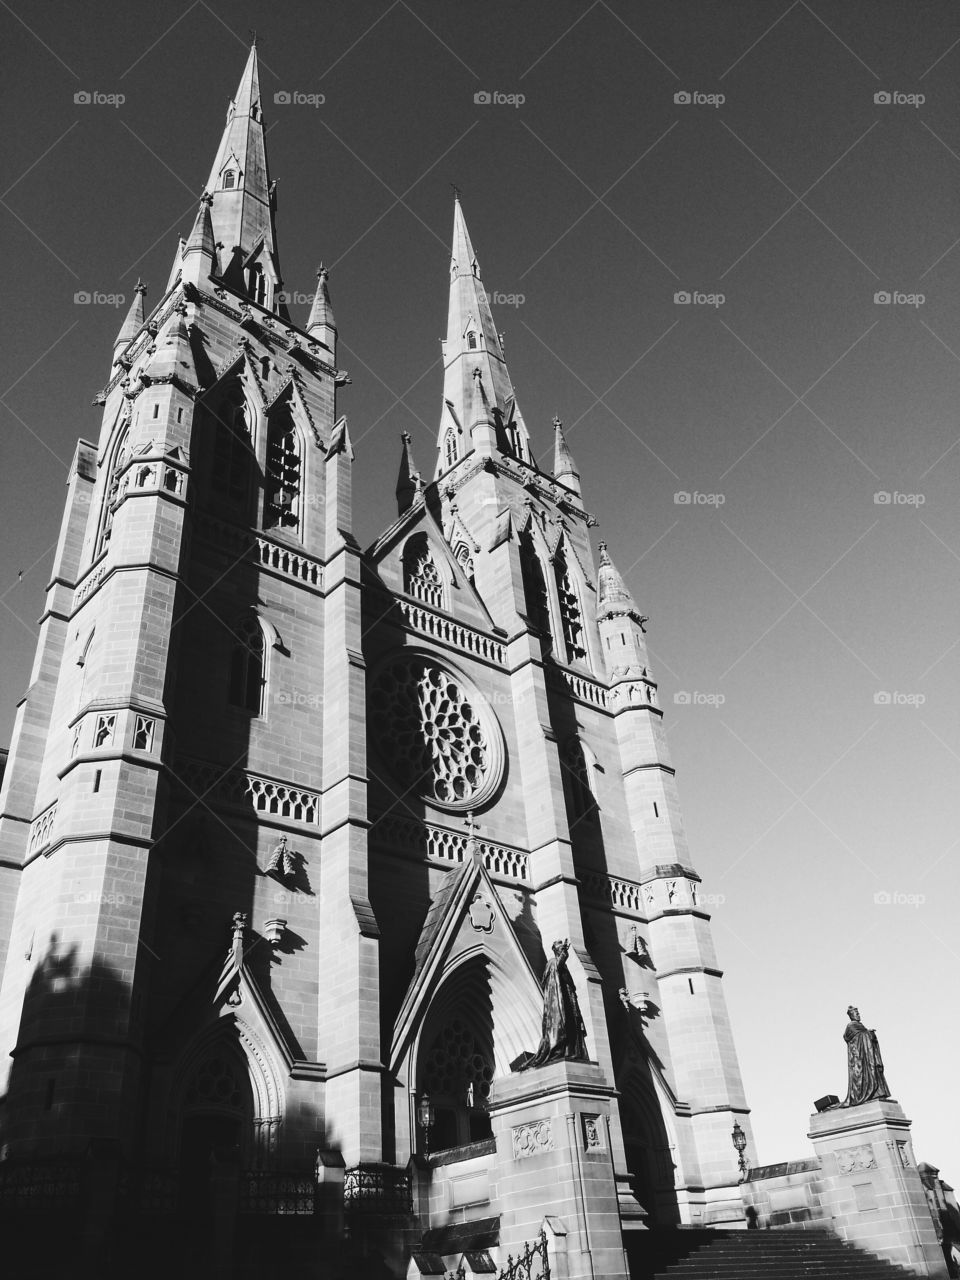 Cathedral. Magnificent  Architecture of a preserved Cathedral shown in broad daylight casted in black and white